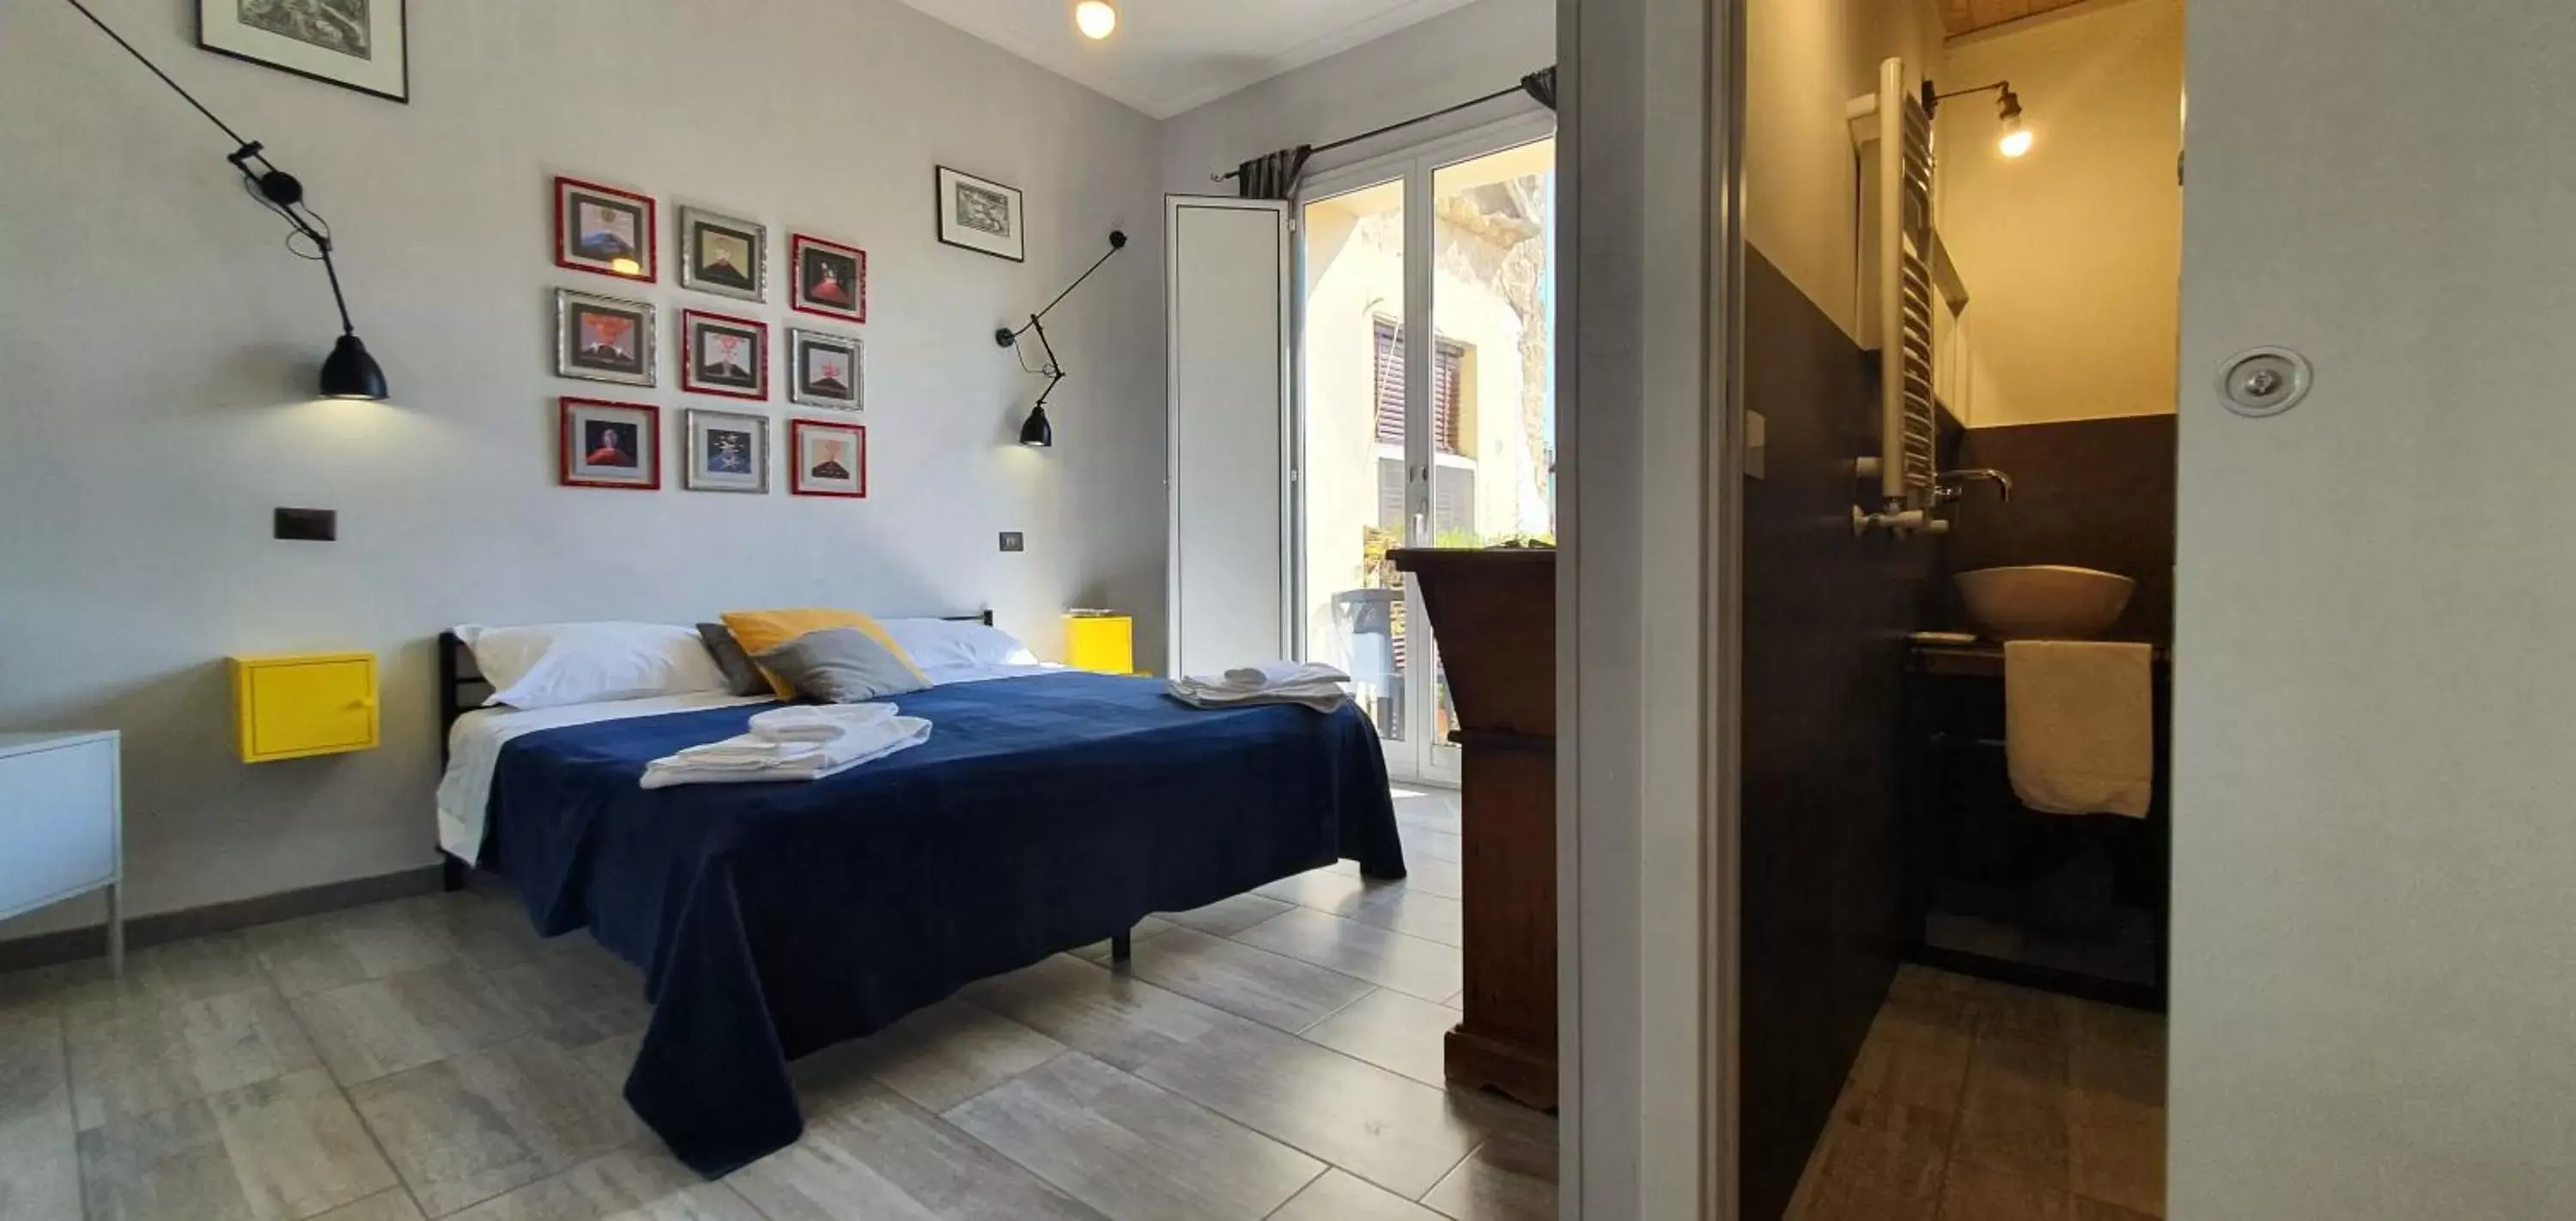 Double Room in Spanish Palace Rooms, Suites Apartments & Terraces